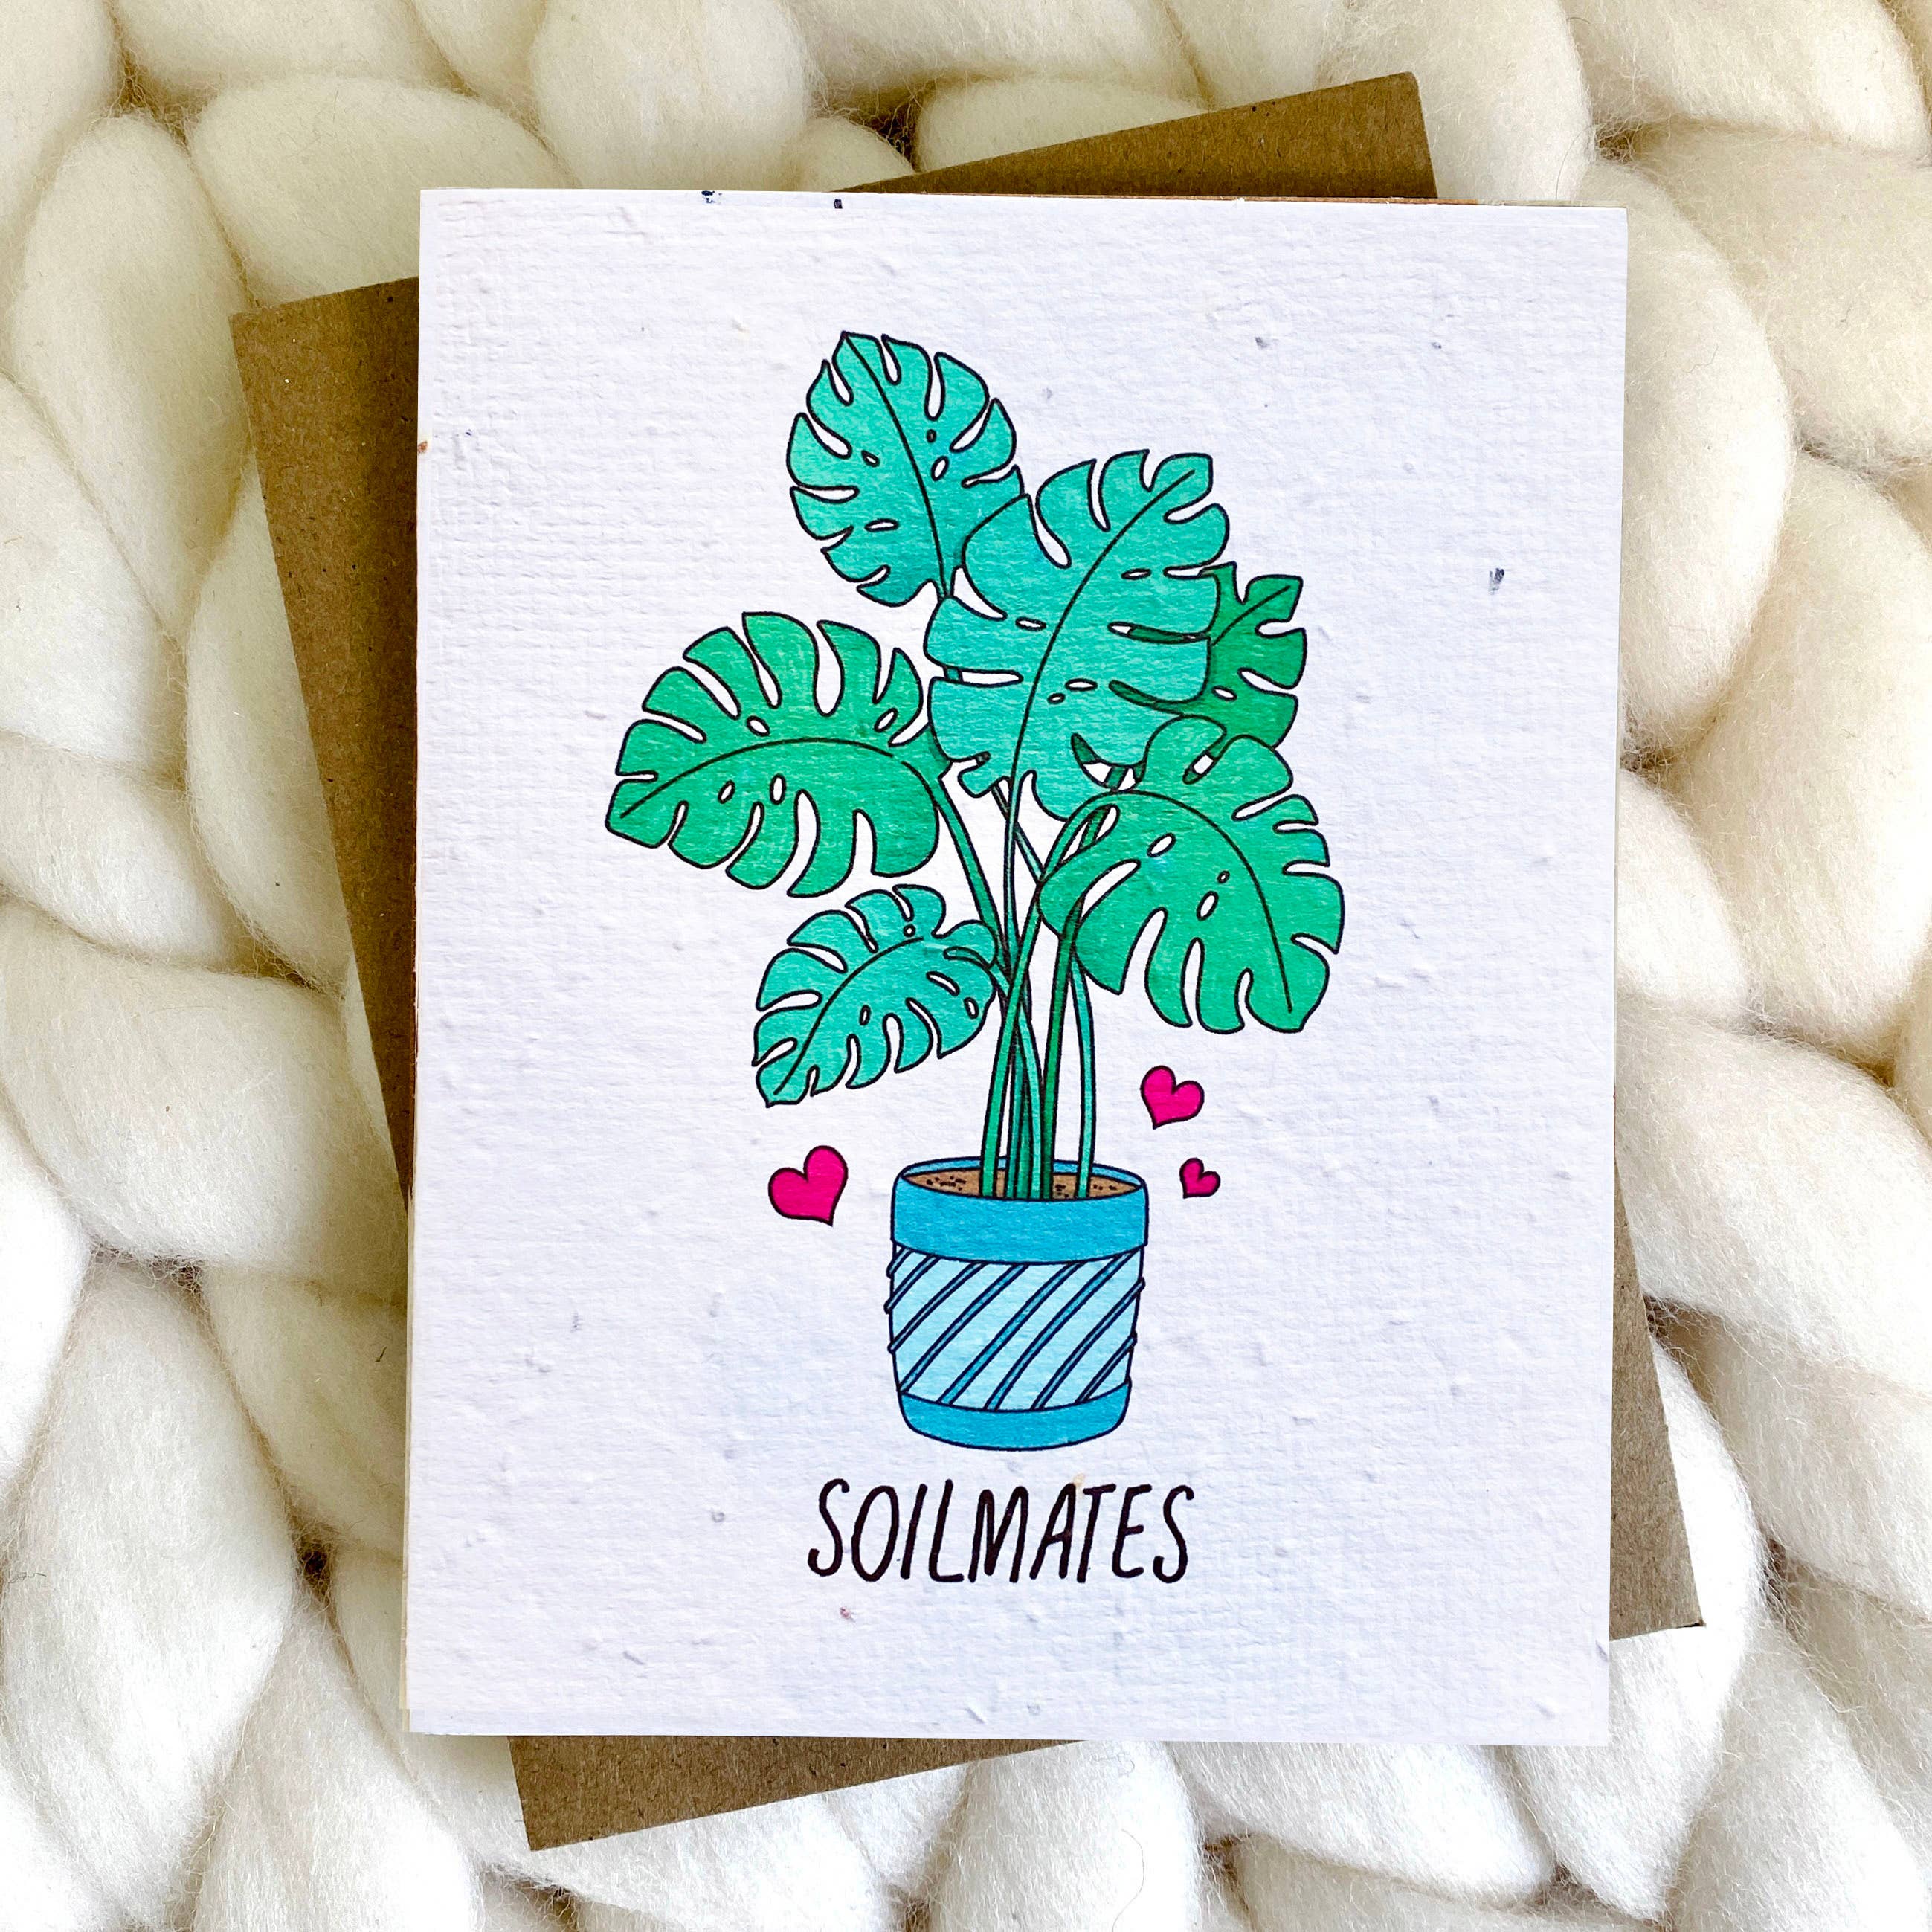 Top Hat and Monocle - Soilmates Plantable Seed Paper Valentine / Anniversary Card